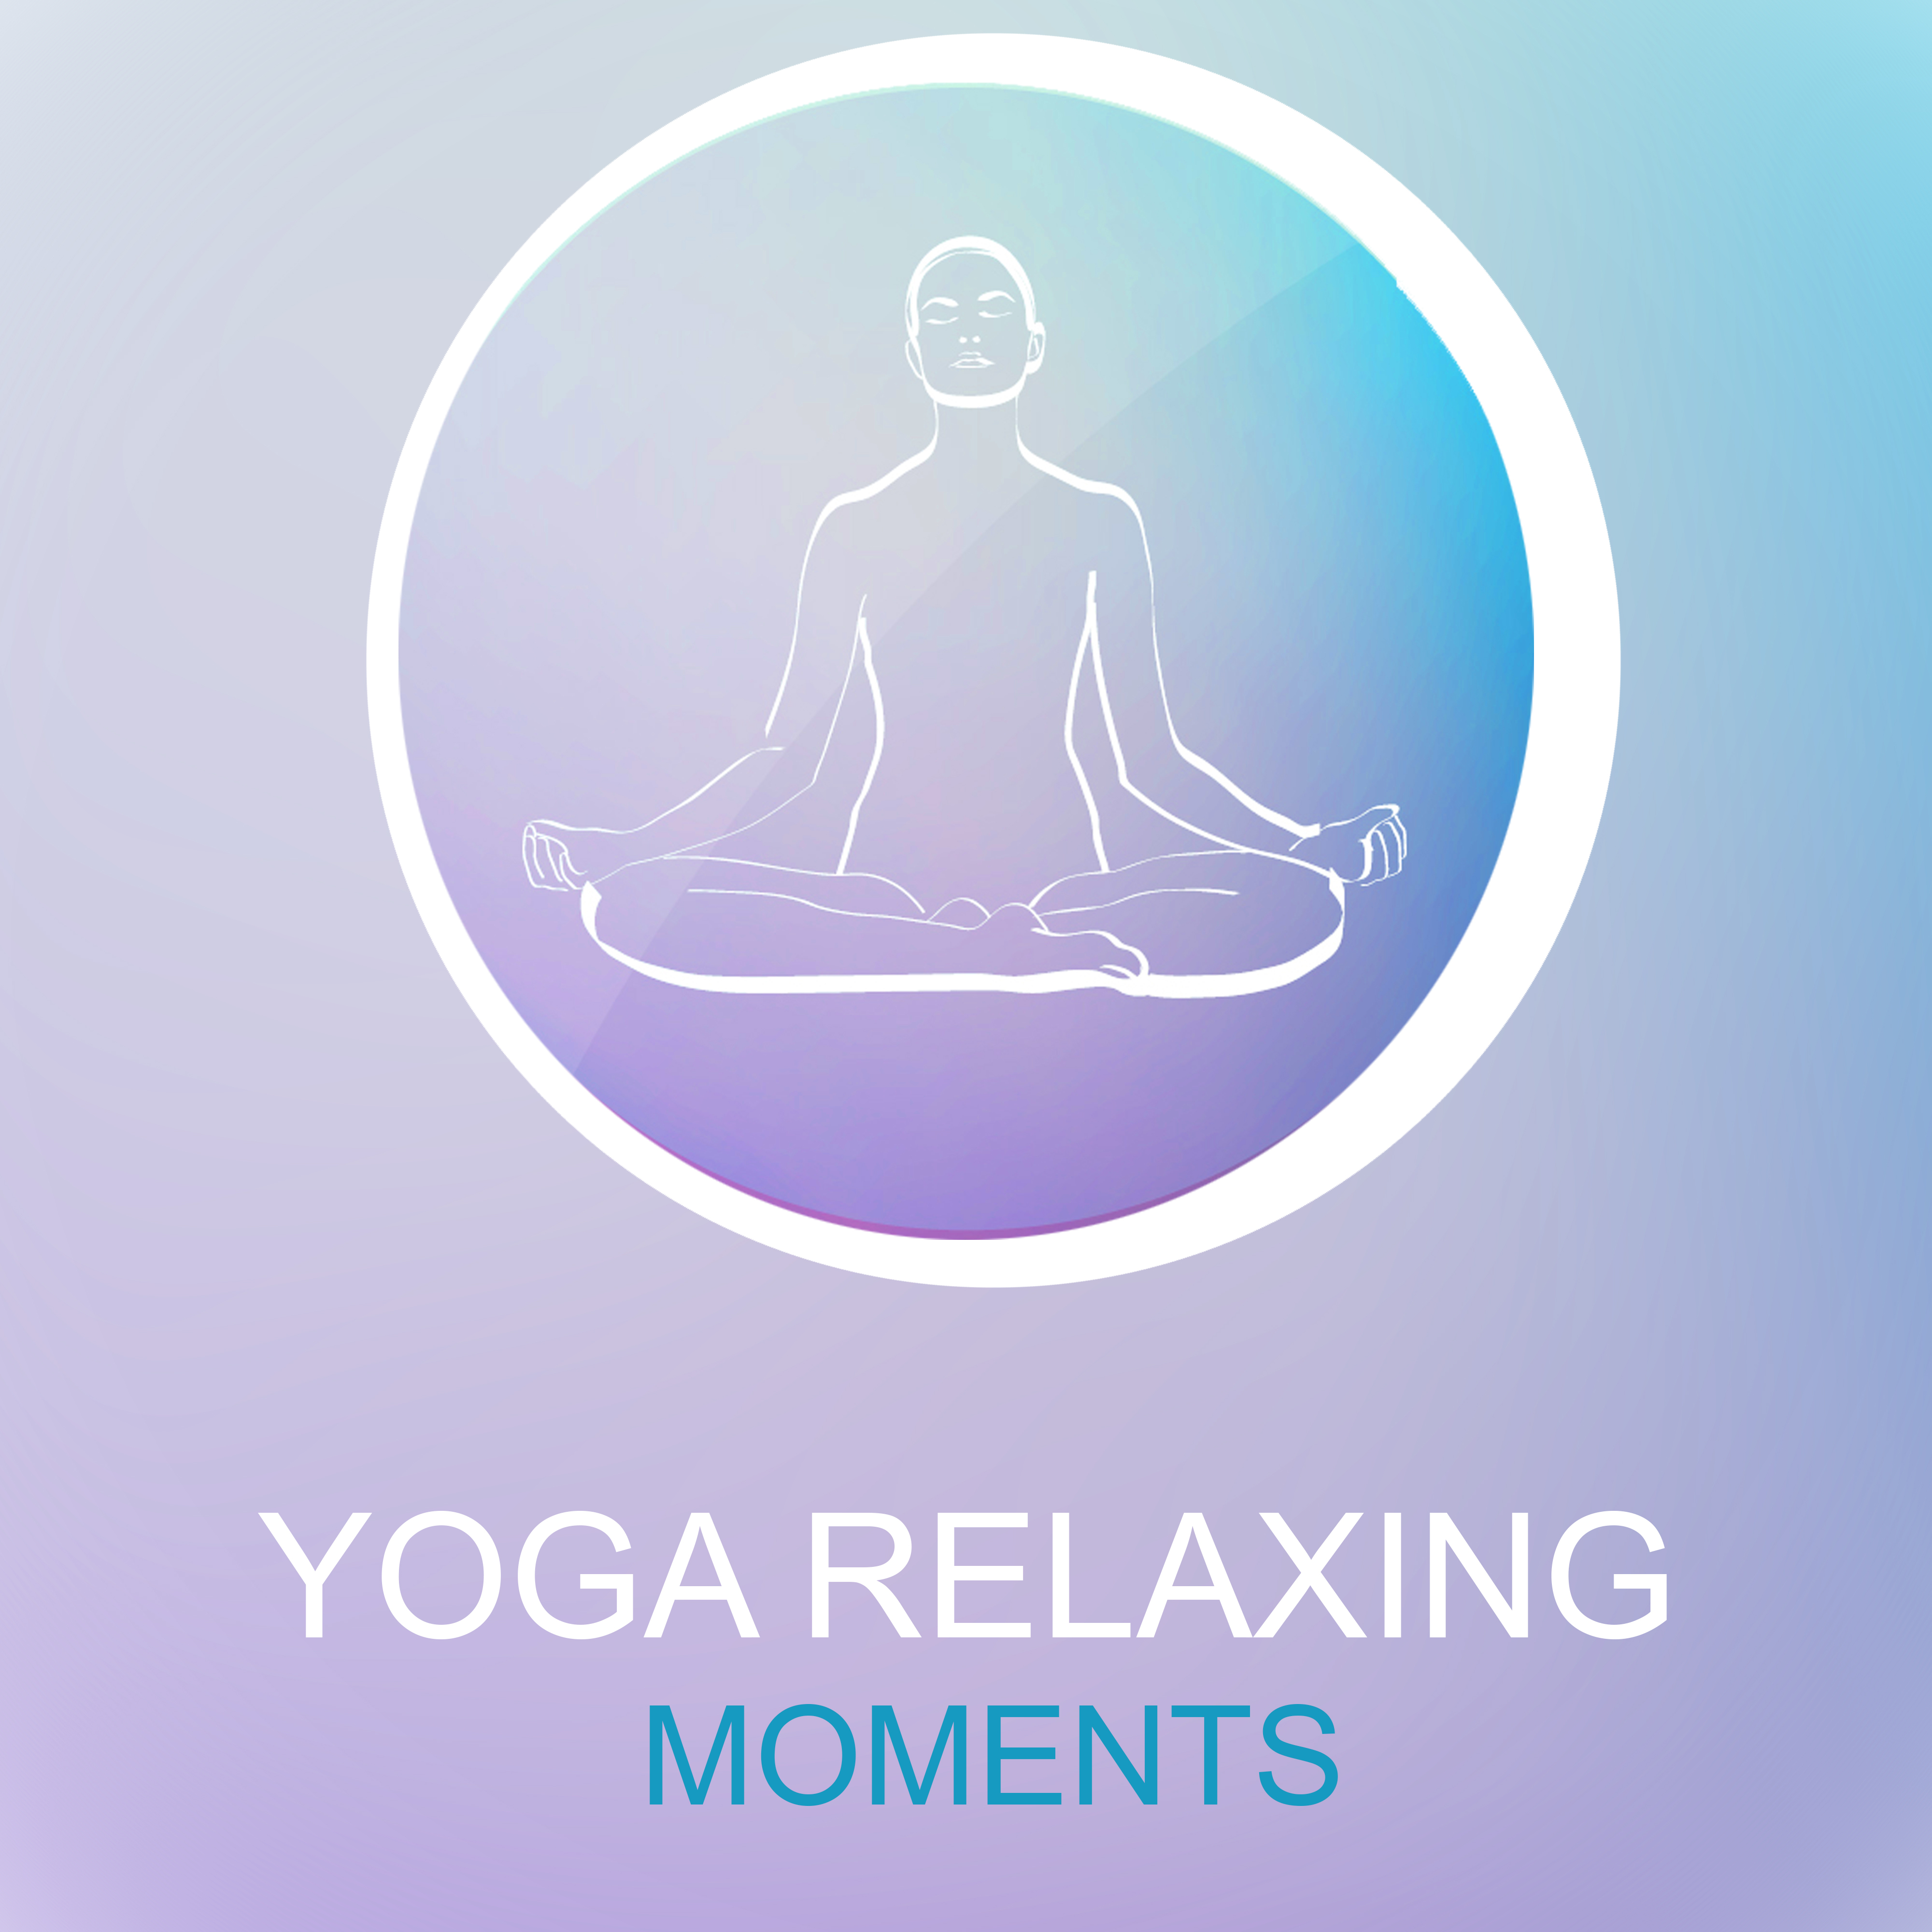 Yoga Relaxing Moments